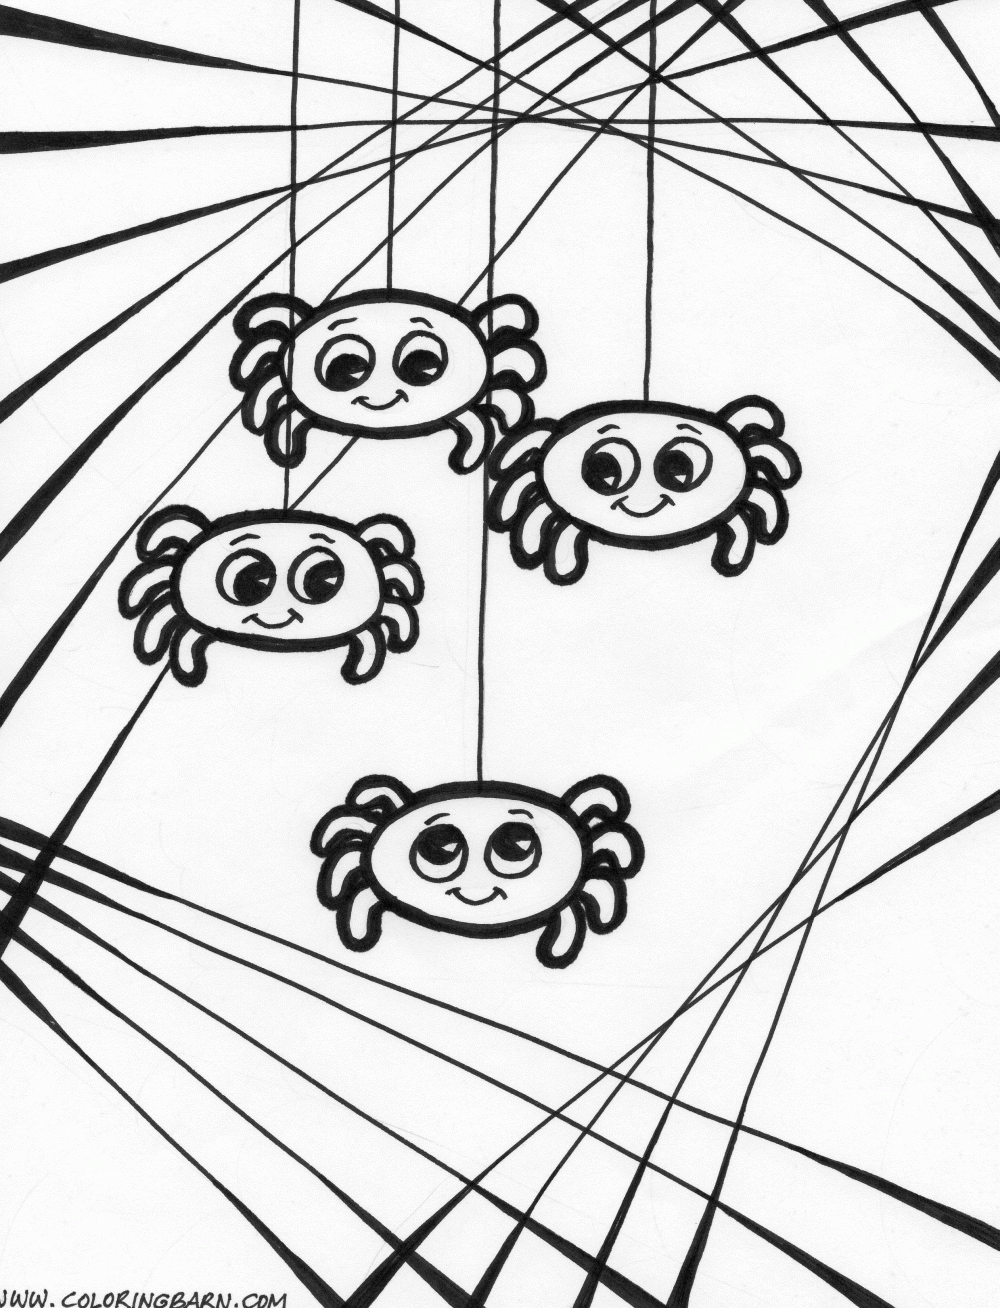 43 Top Cute Spider Coloring Pages Download Free Images